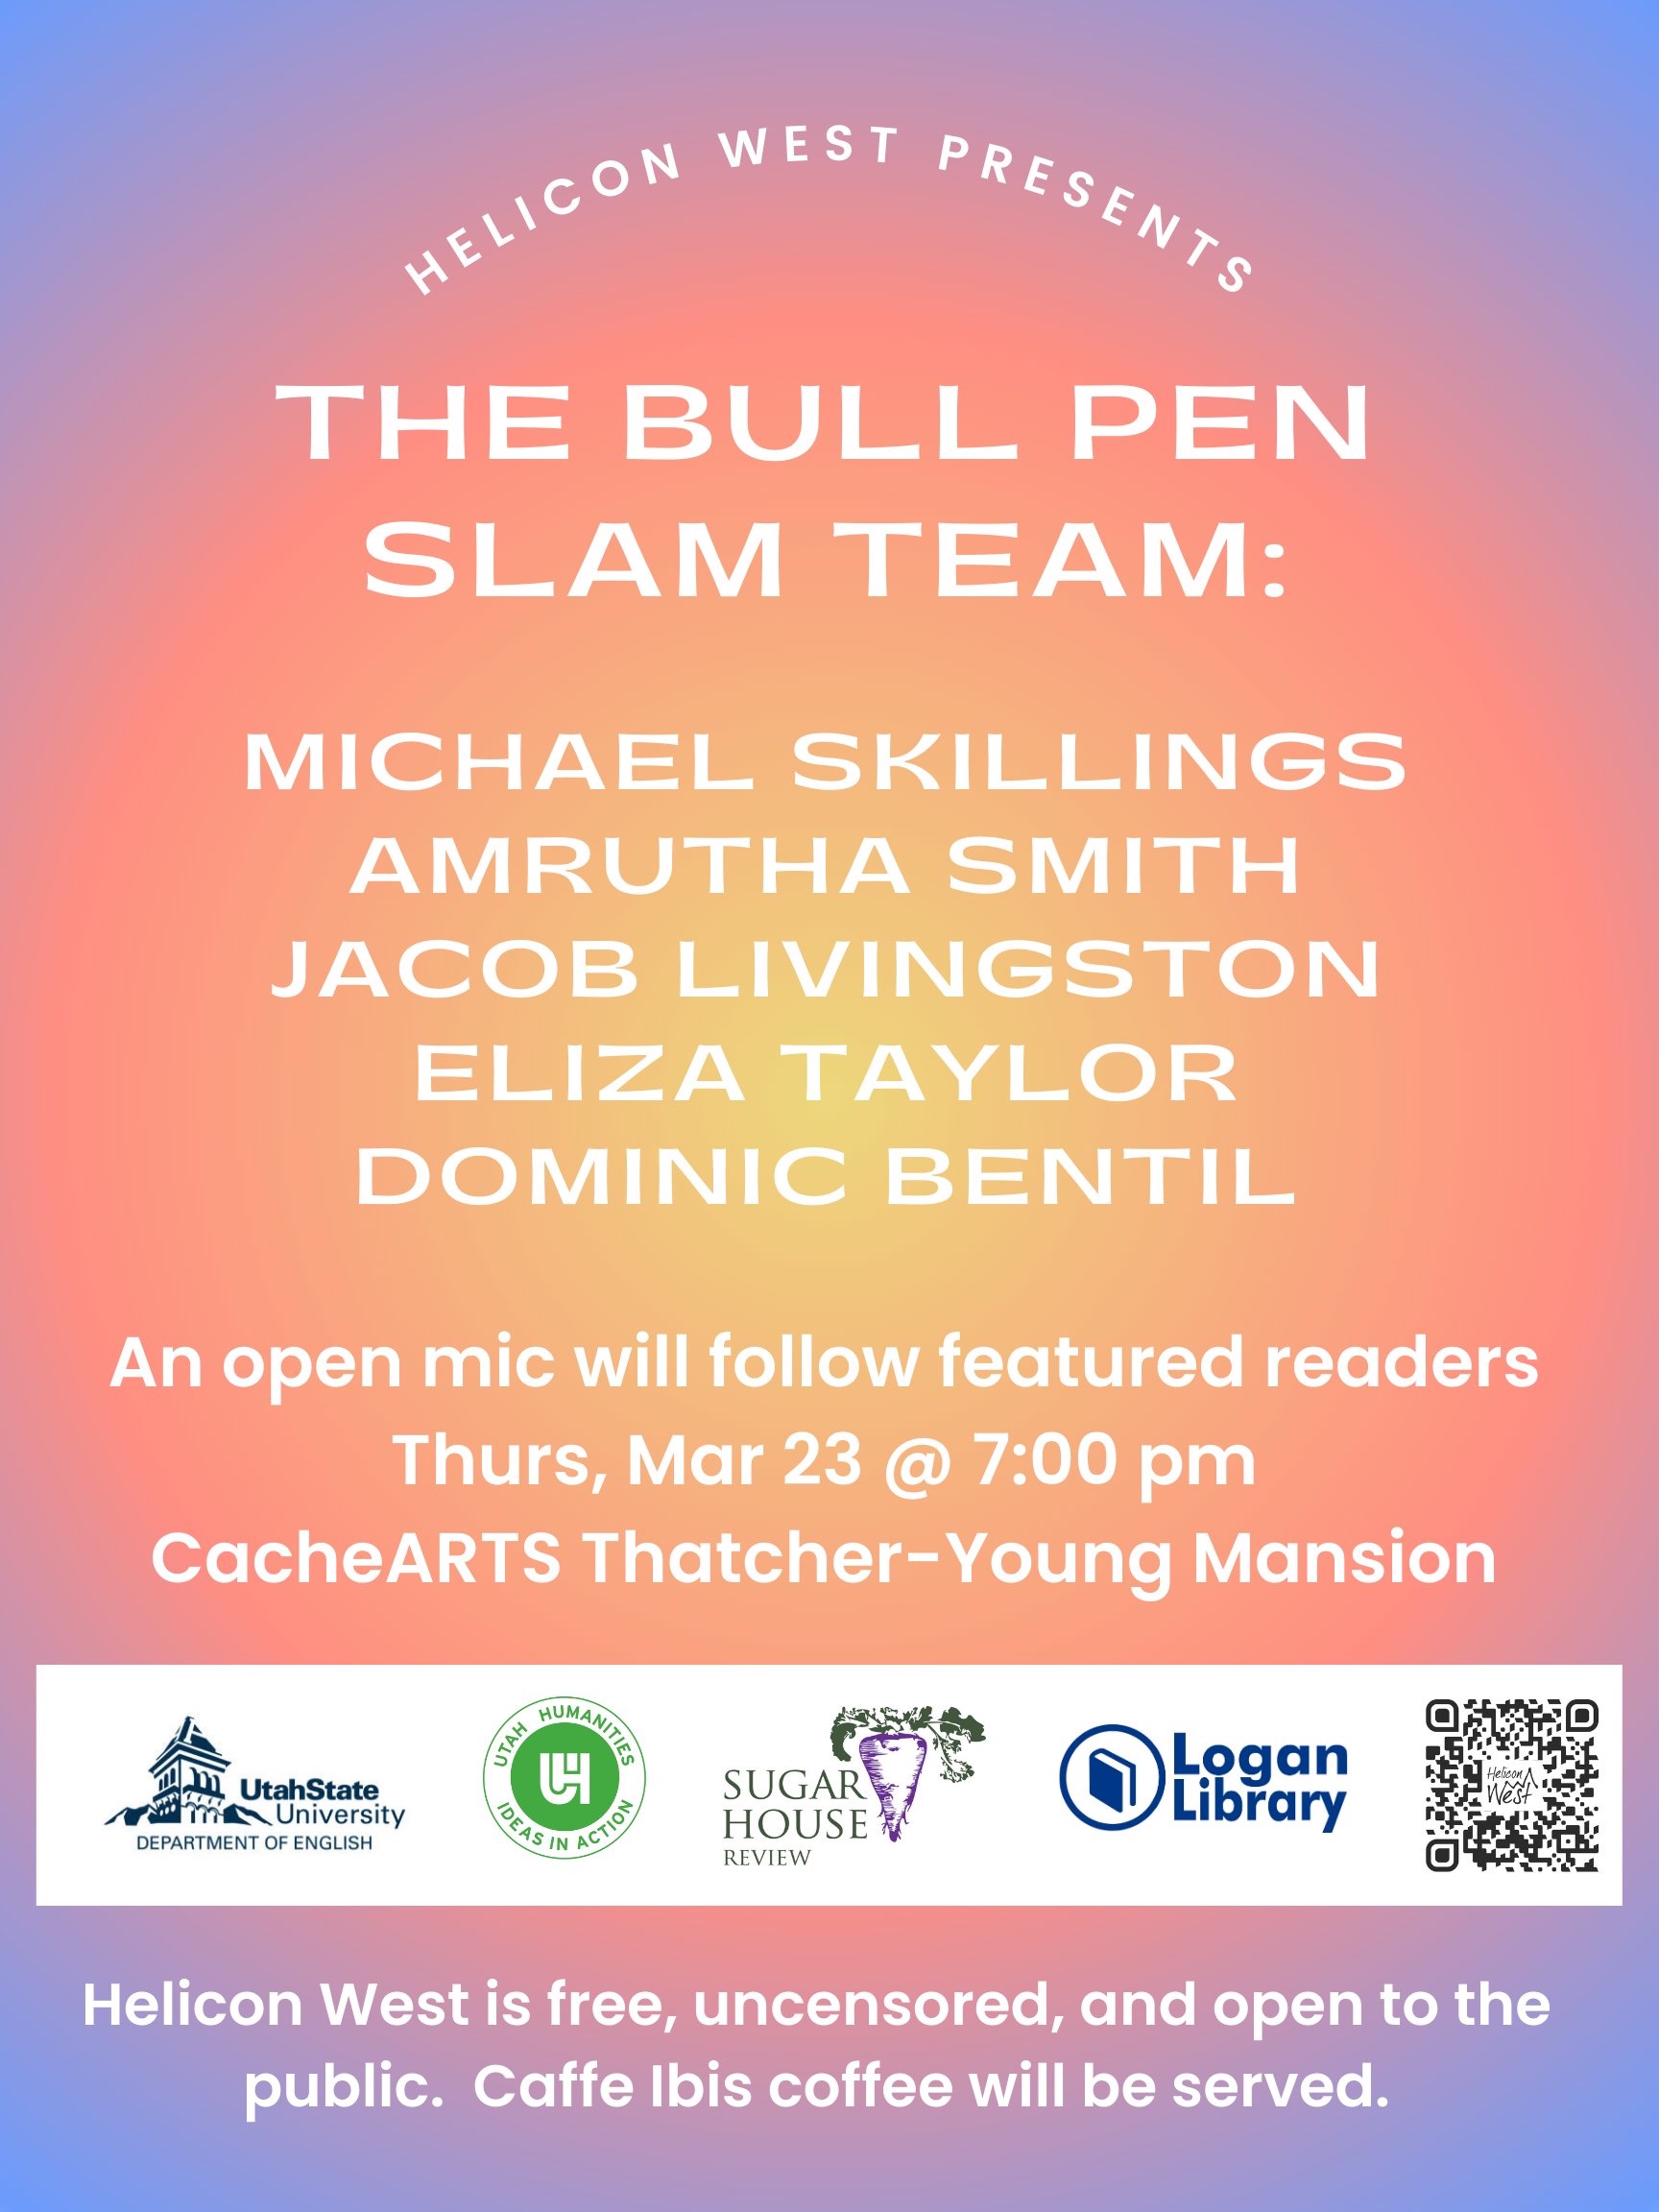 Helicon West Presents The Bull Pen Slam Team: Michael Skillings, Amrutha Smith, Jacob Livingston, Eliza Taylor, and Dominic Bentil. An open mic will follow featured readers. Thursday, March 23rd at 7:00pm at the CacheARTS Thatcher-Young Mansion. Helicon West is free, uncensored, and open to the public. Caffe Ibis coffee will be served. 